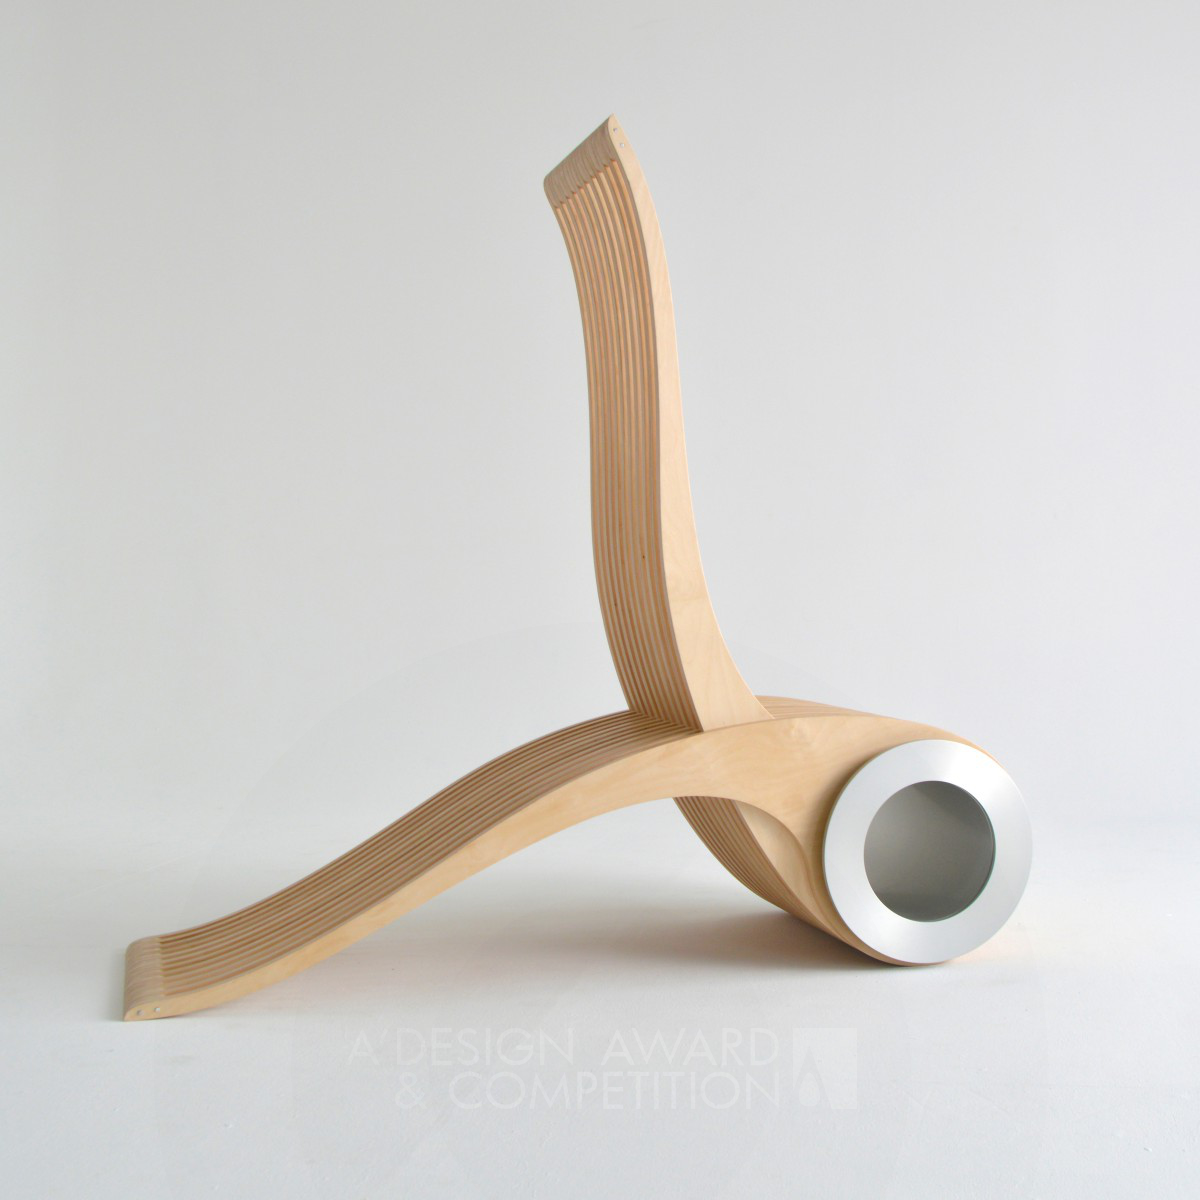 Stéphane Leathead wins Golden at the prestigious A' Furniture Design Award with Exocet Multifunctional Chair.